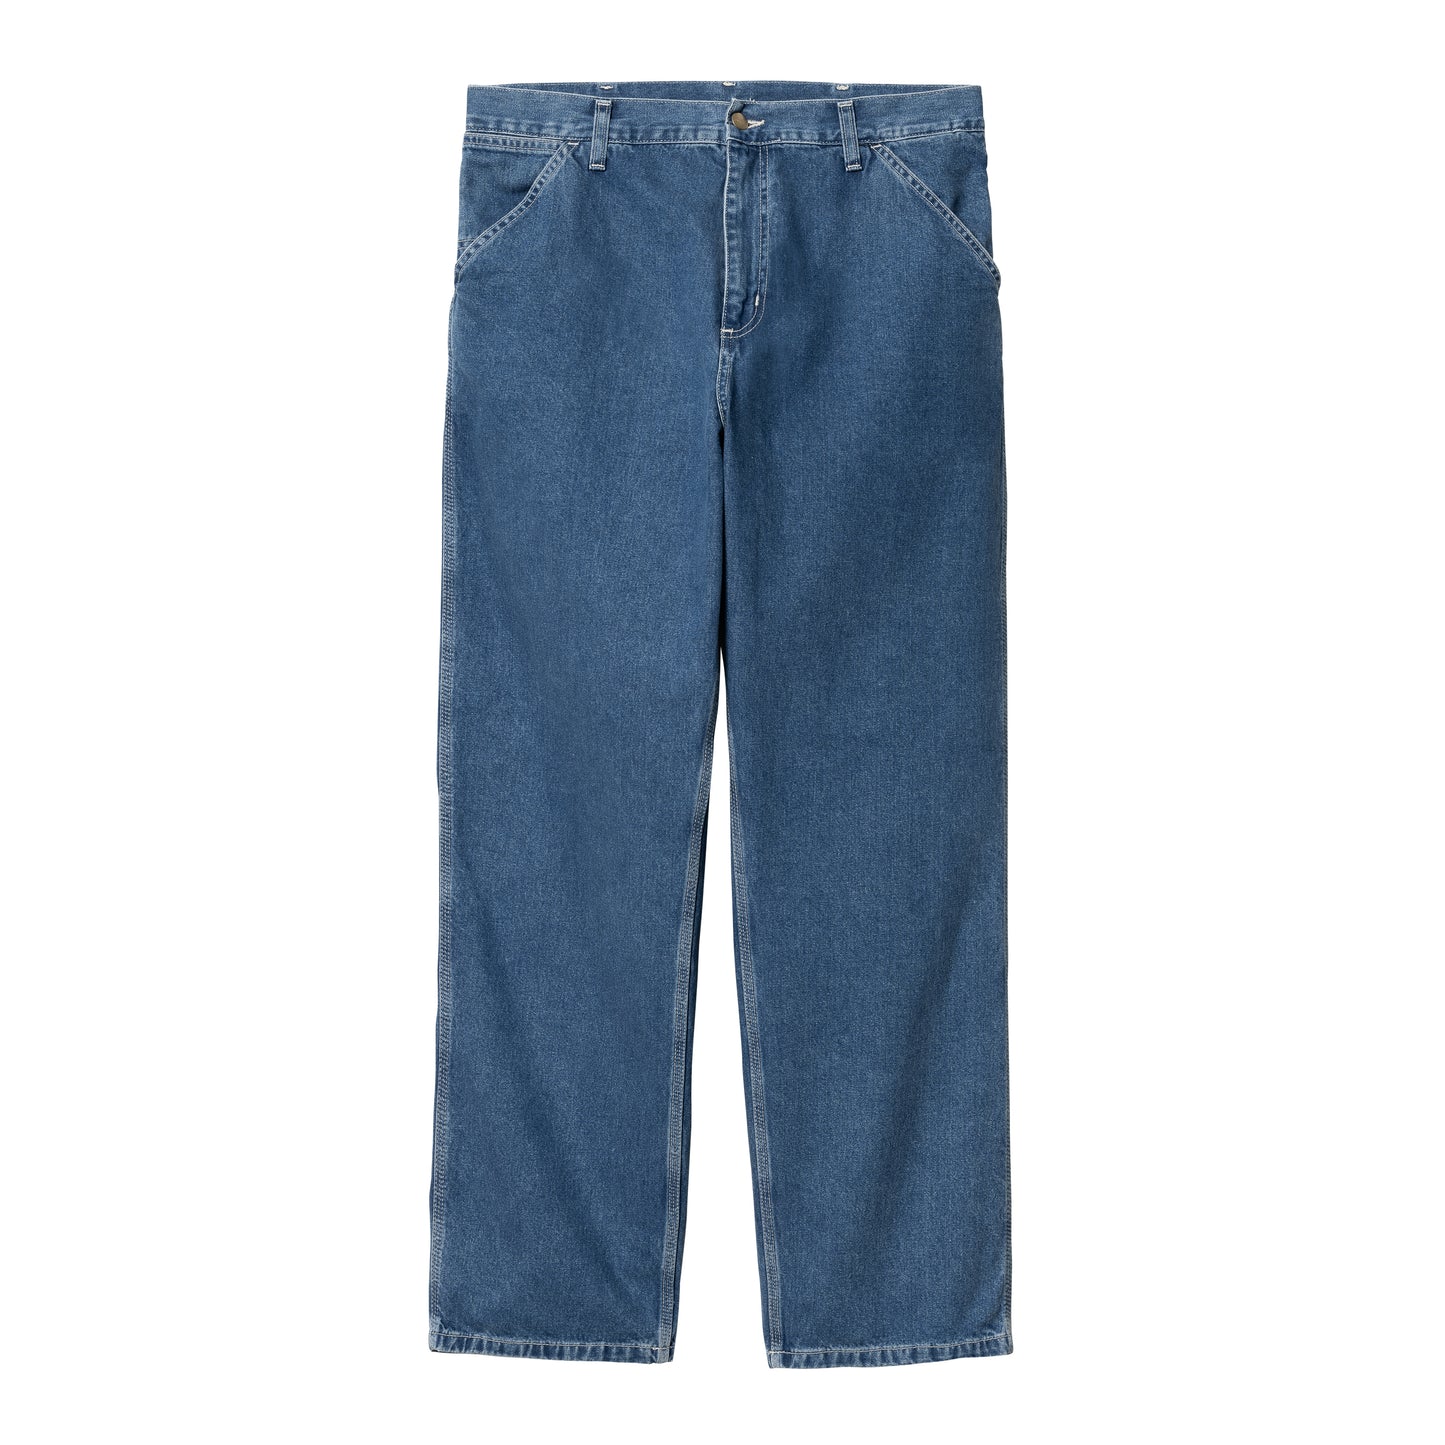 Simple Pant - Blue (Stone Washed)